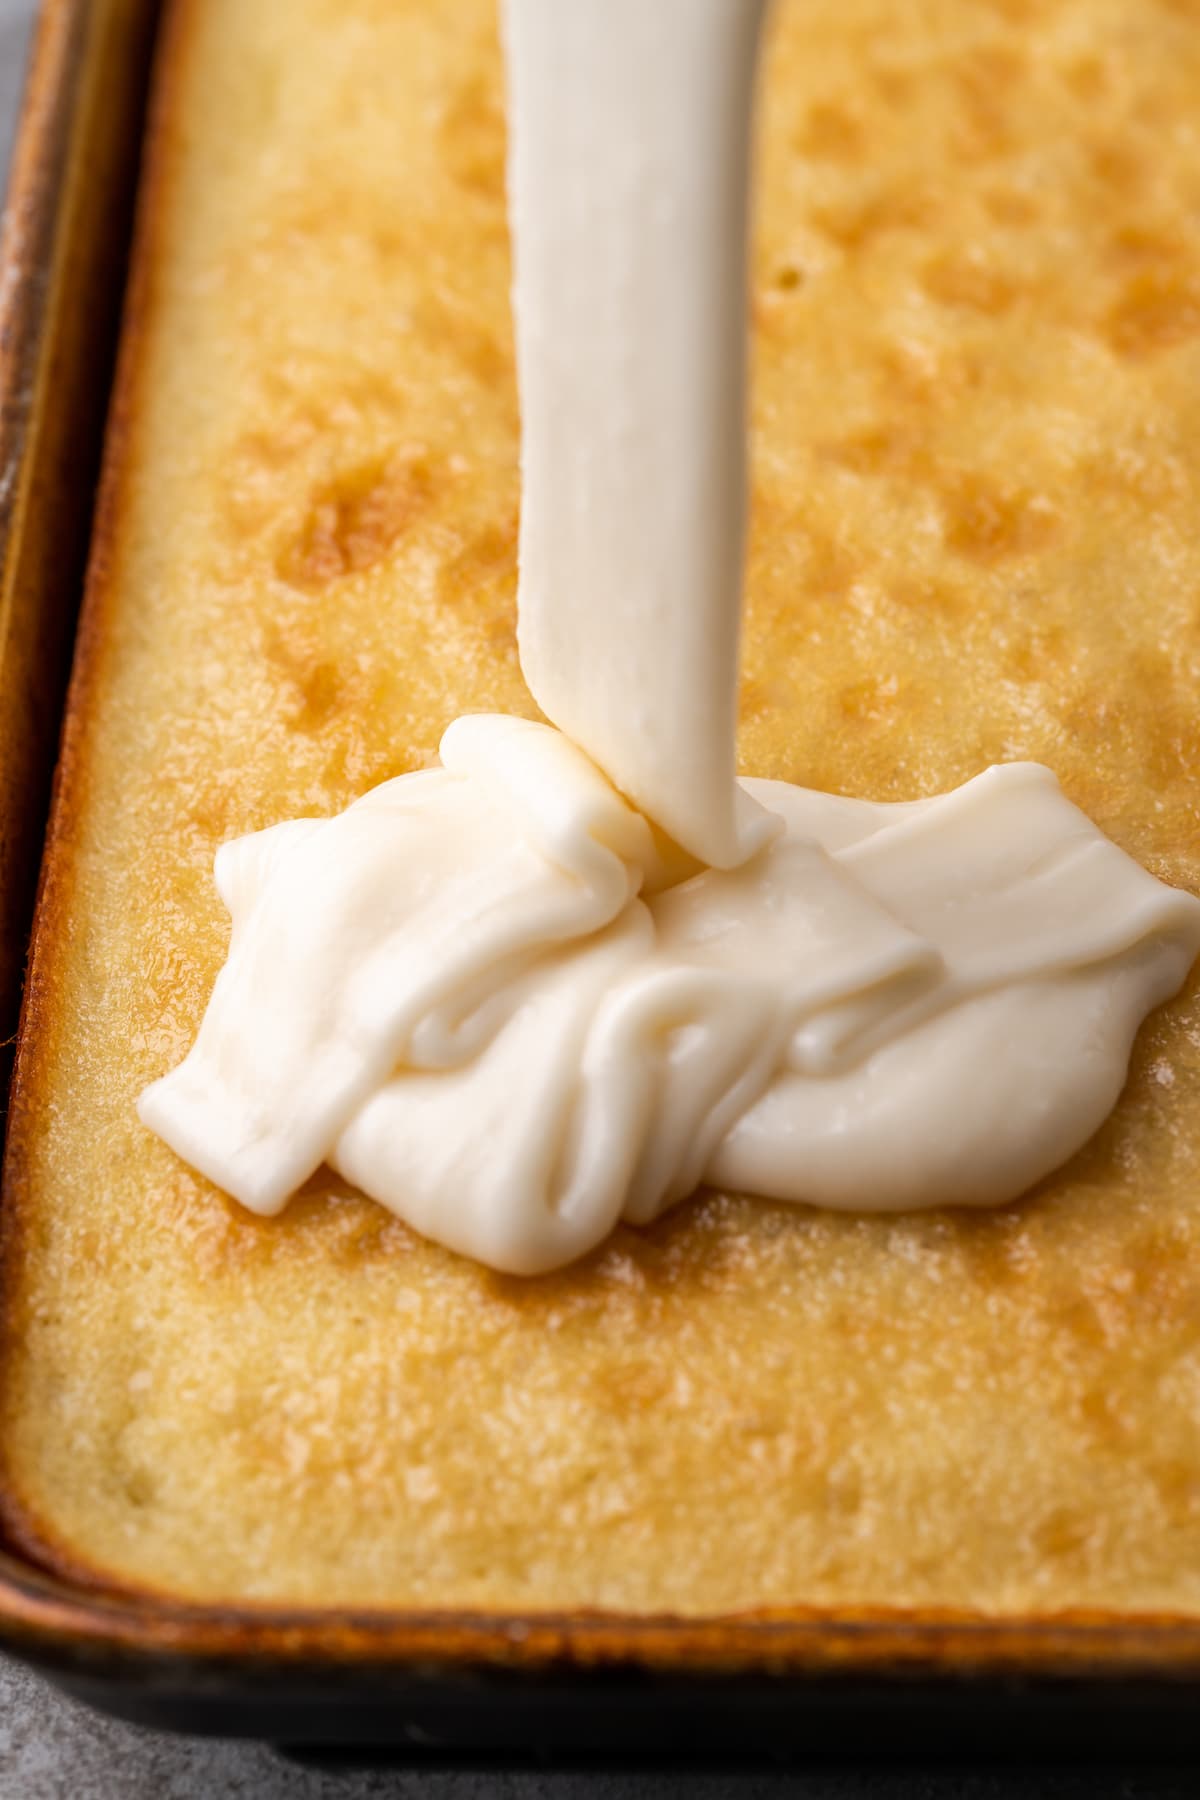 Vanilla frosting is drizzled into a baked buttermilk sheet cake.